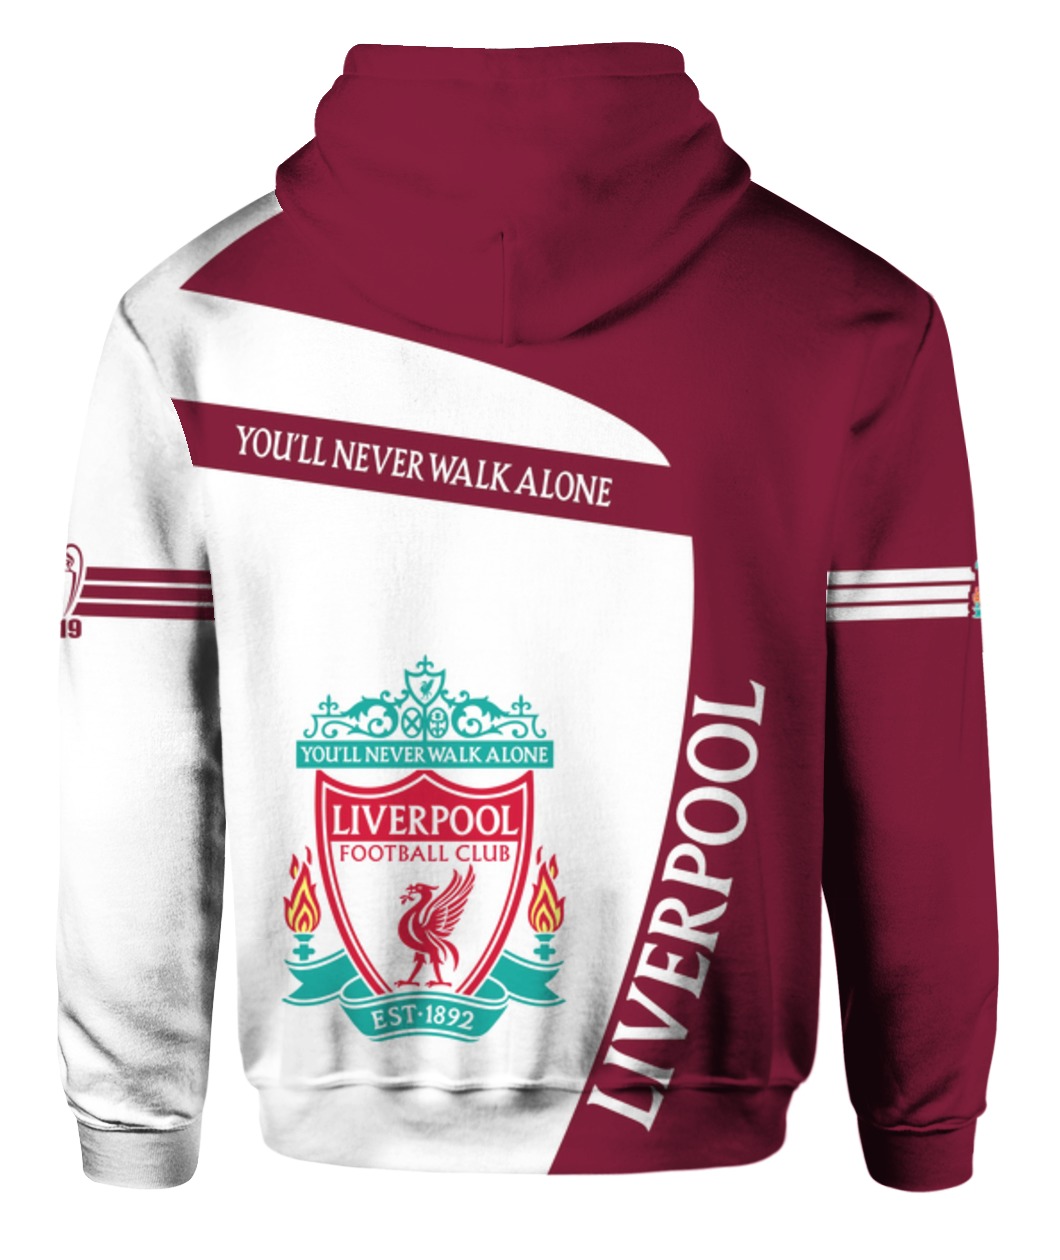 You'll never walk alone liverpool football club all over print hoodie - back